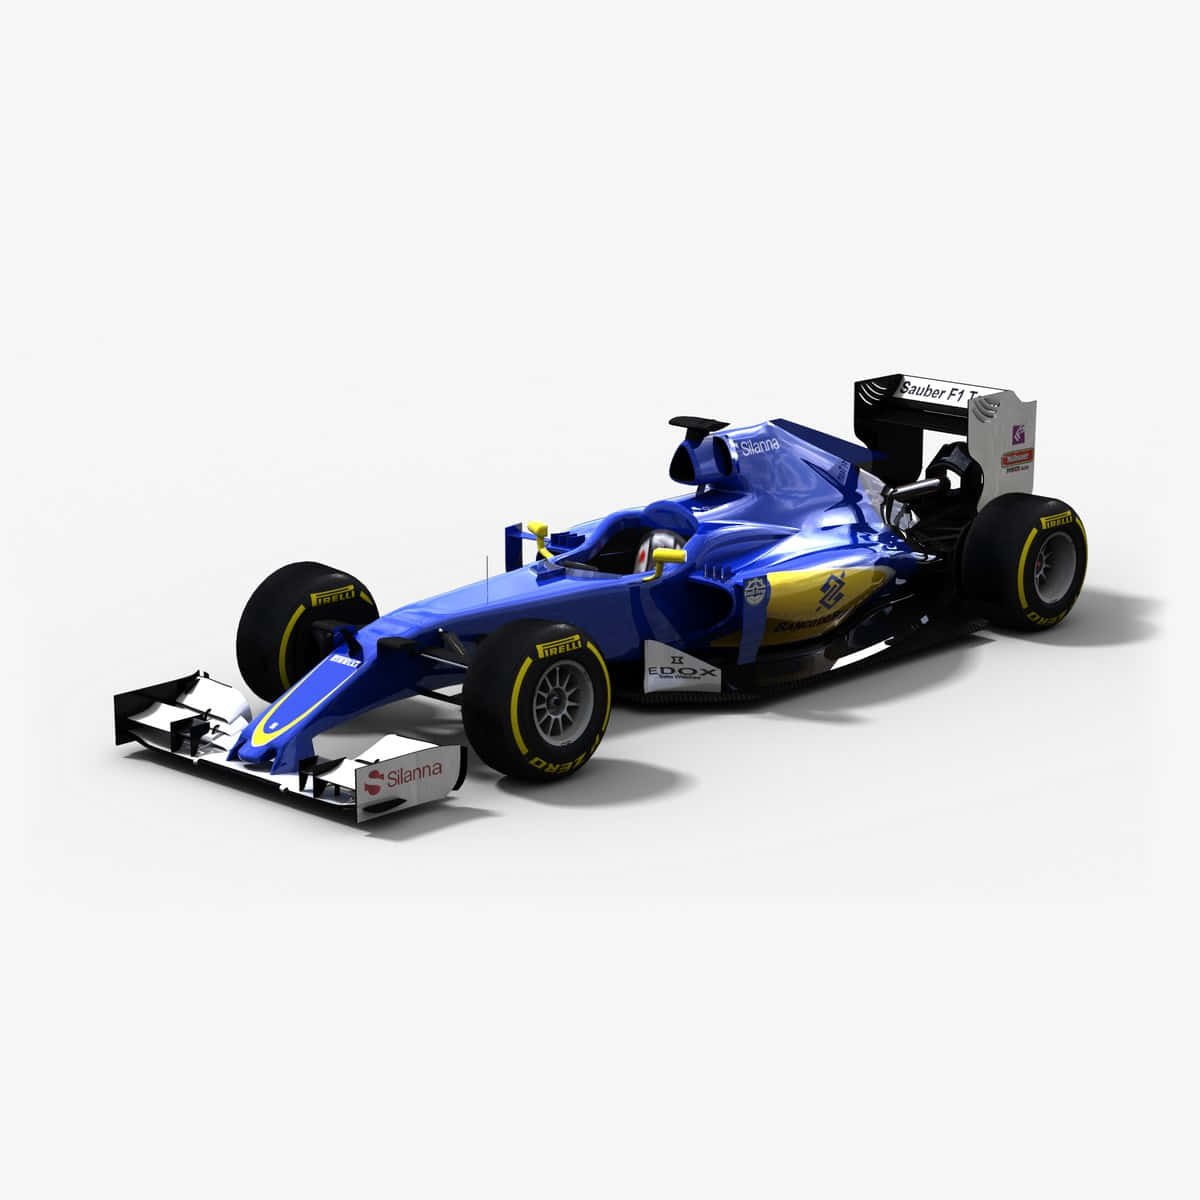 A Blue Racing Car On A White Background